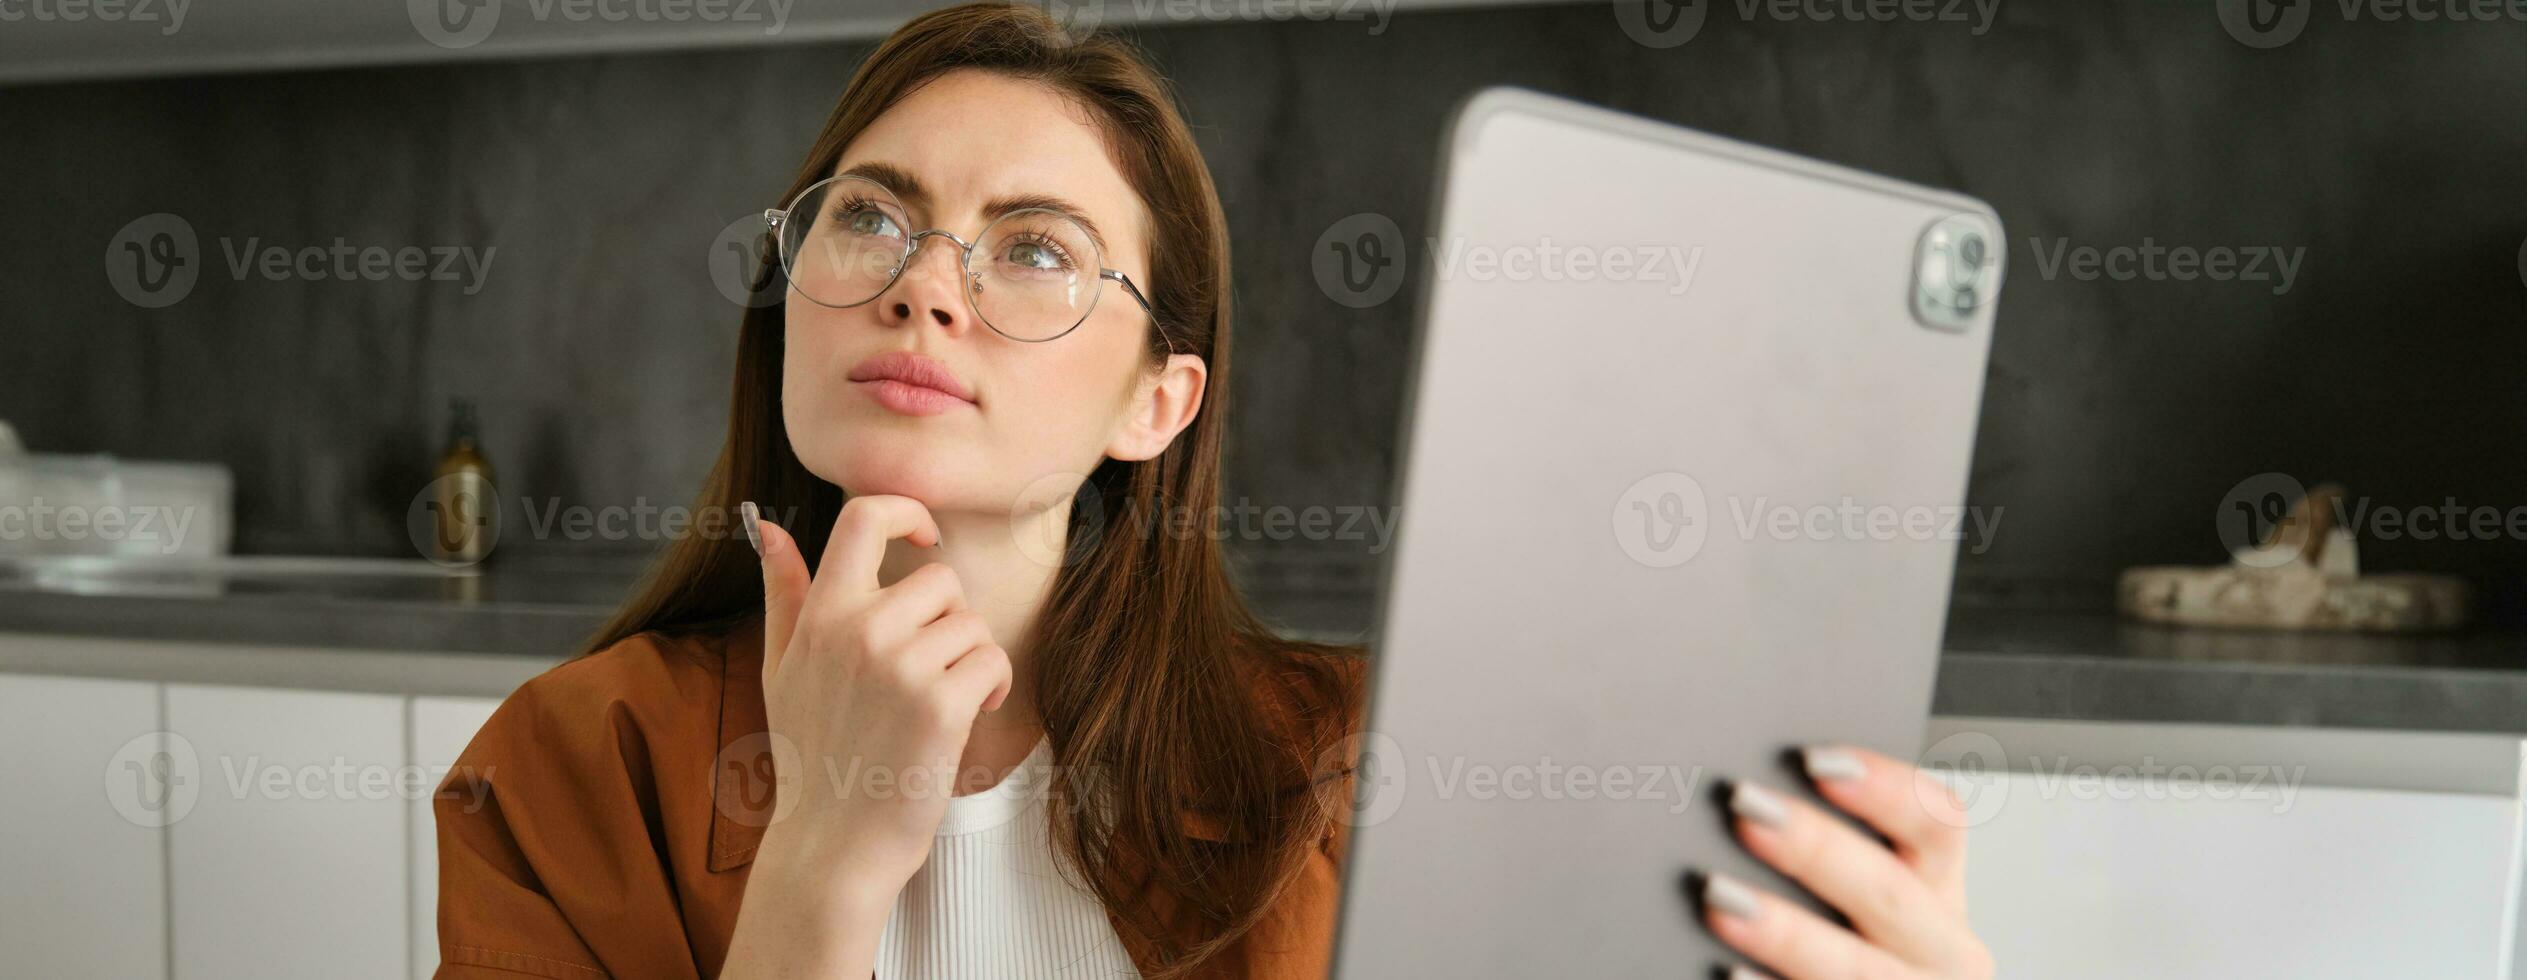 Close up portrait of serious woman working from home, holding digital tablet, looking aside with thinking face, pondering, studying online, works on remote photo